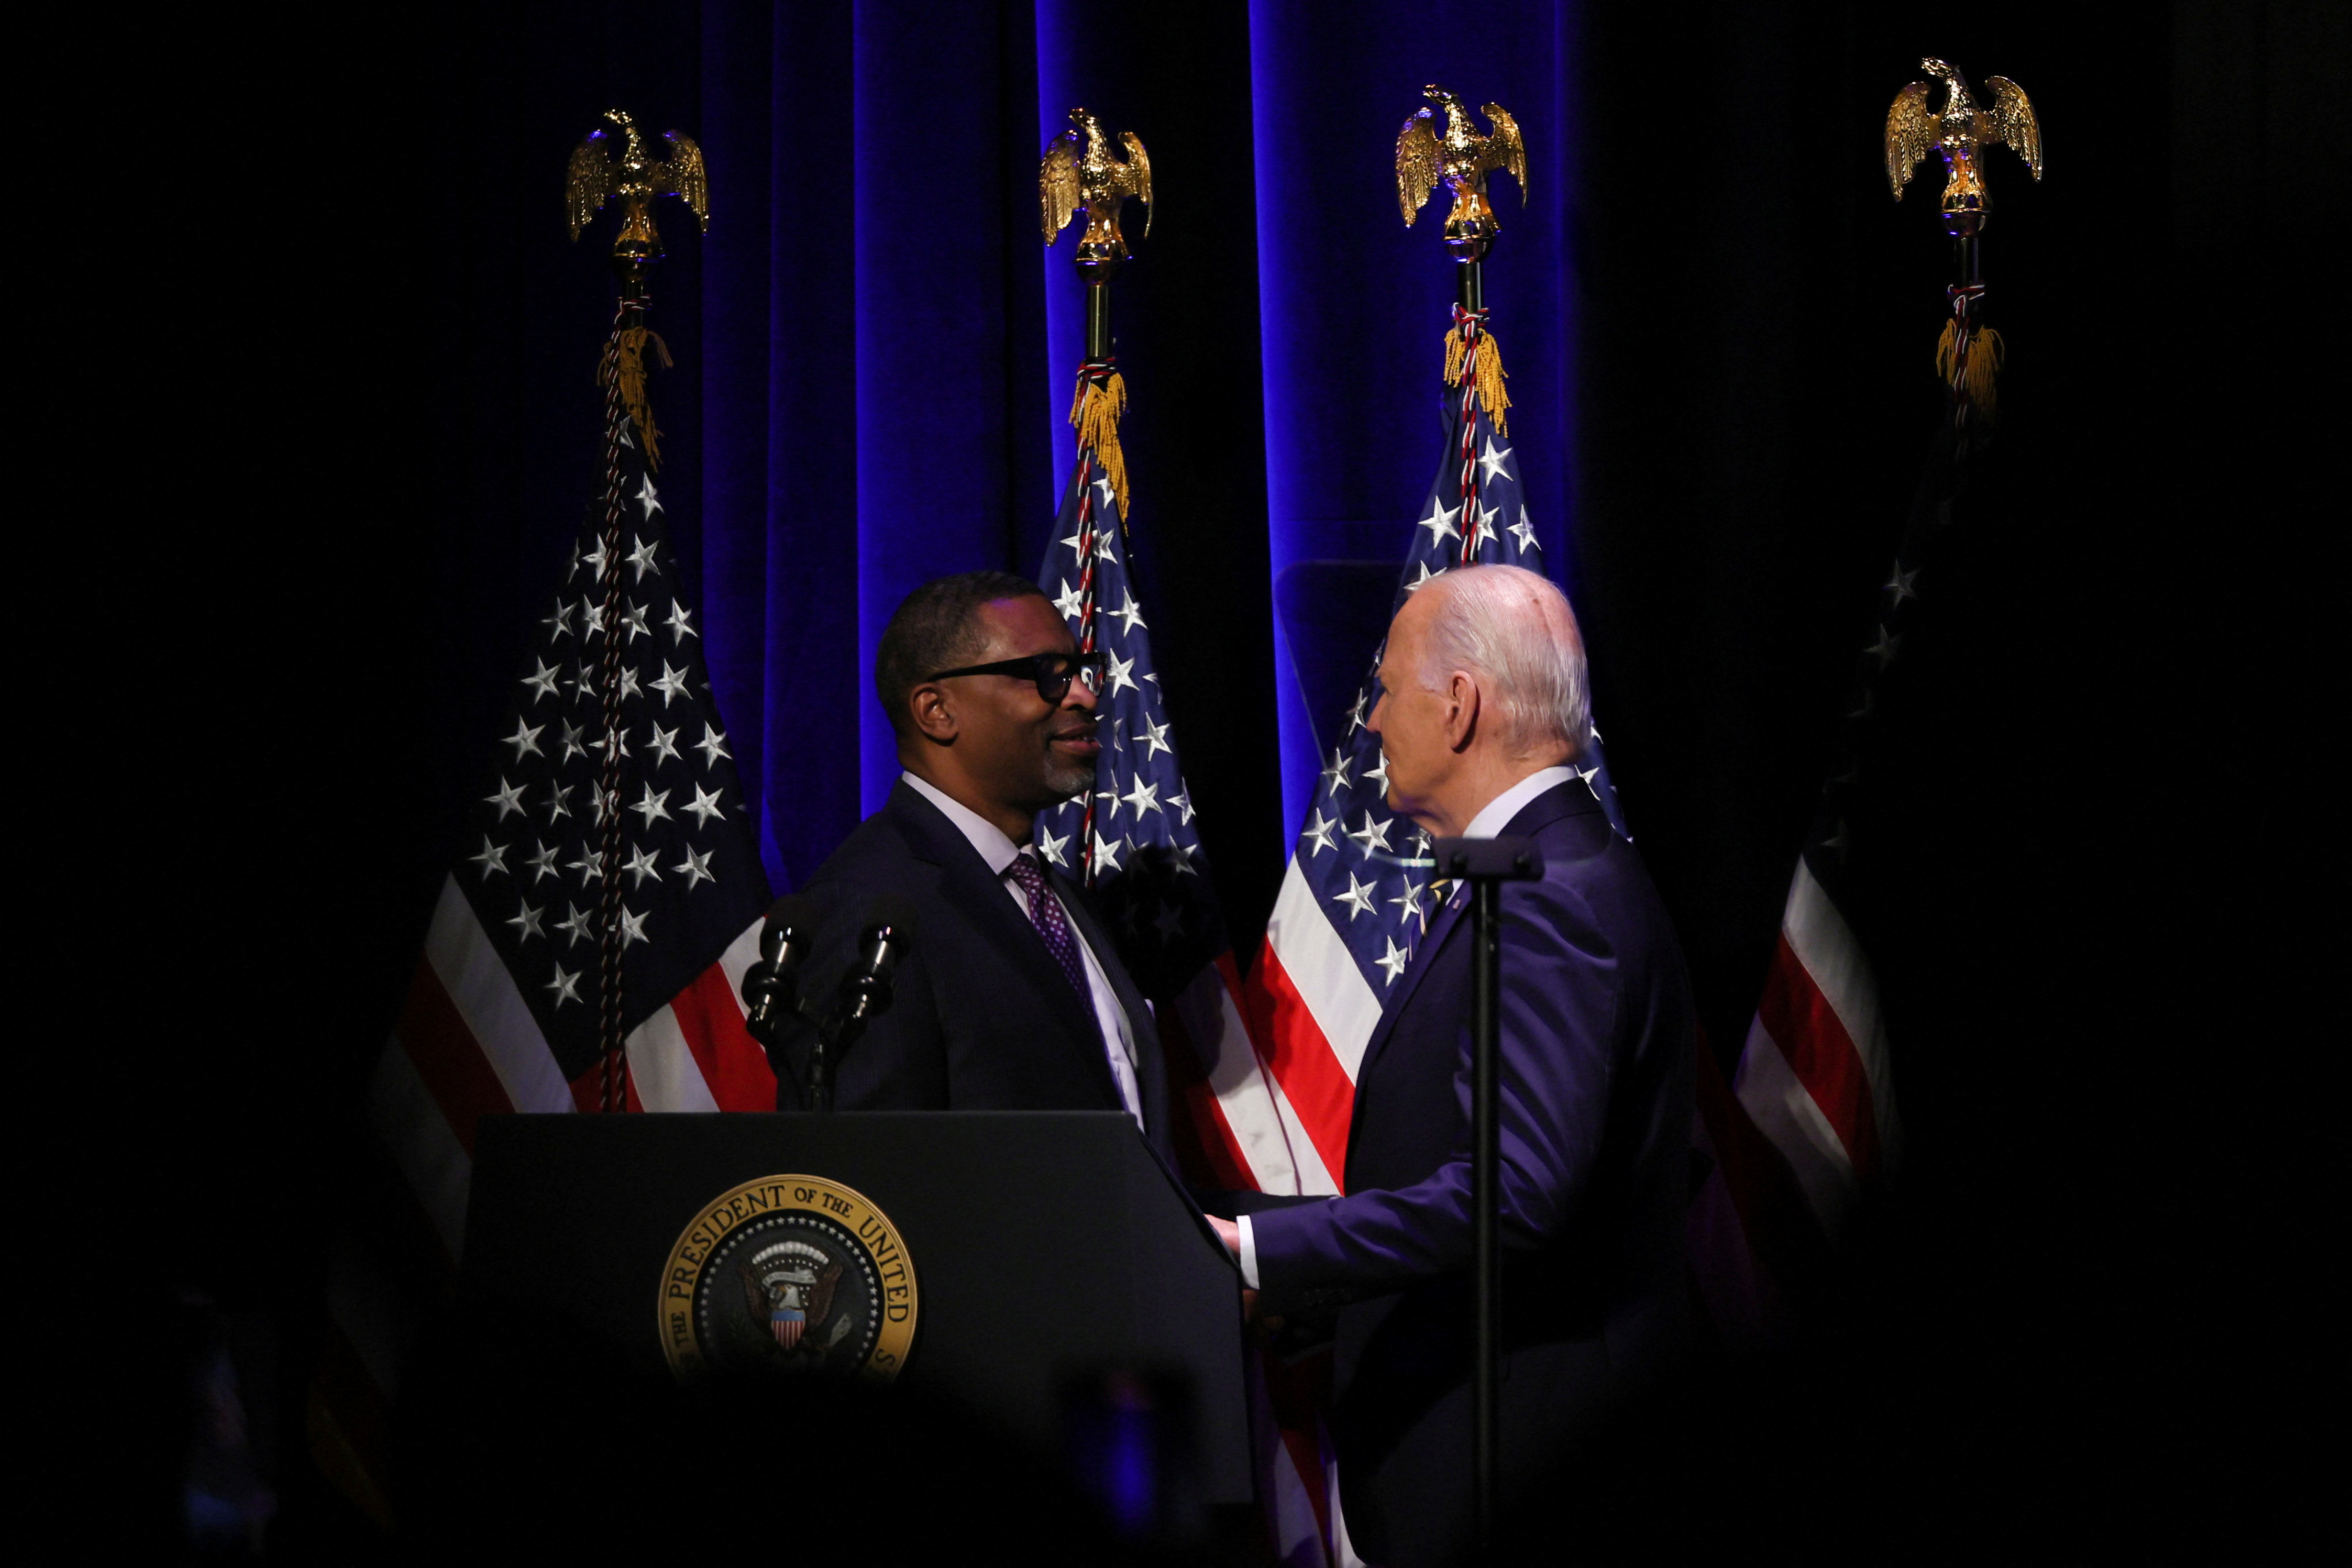 U.S. President Joe Biden speaks at the National Museum of African American History and Culture, in Washington